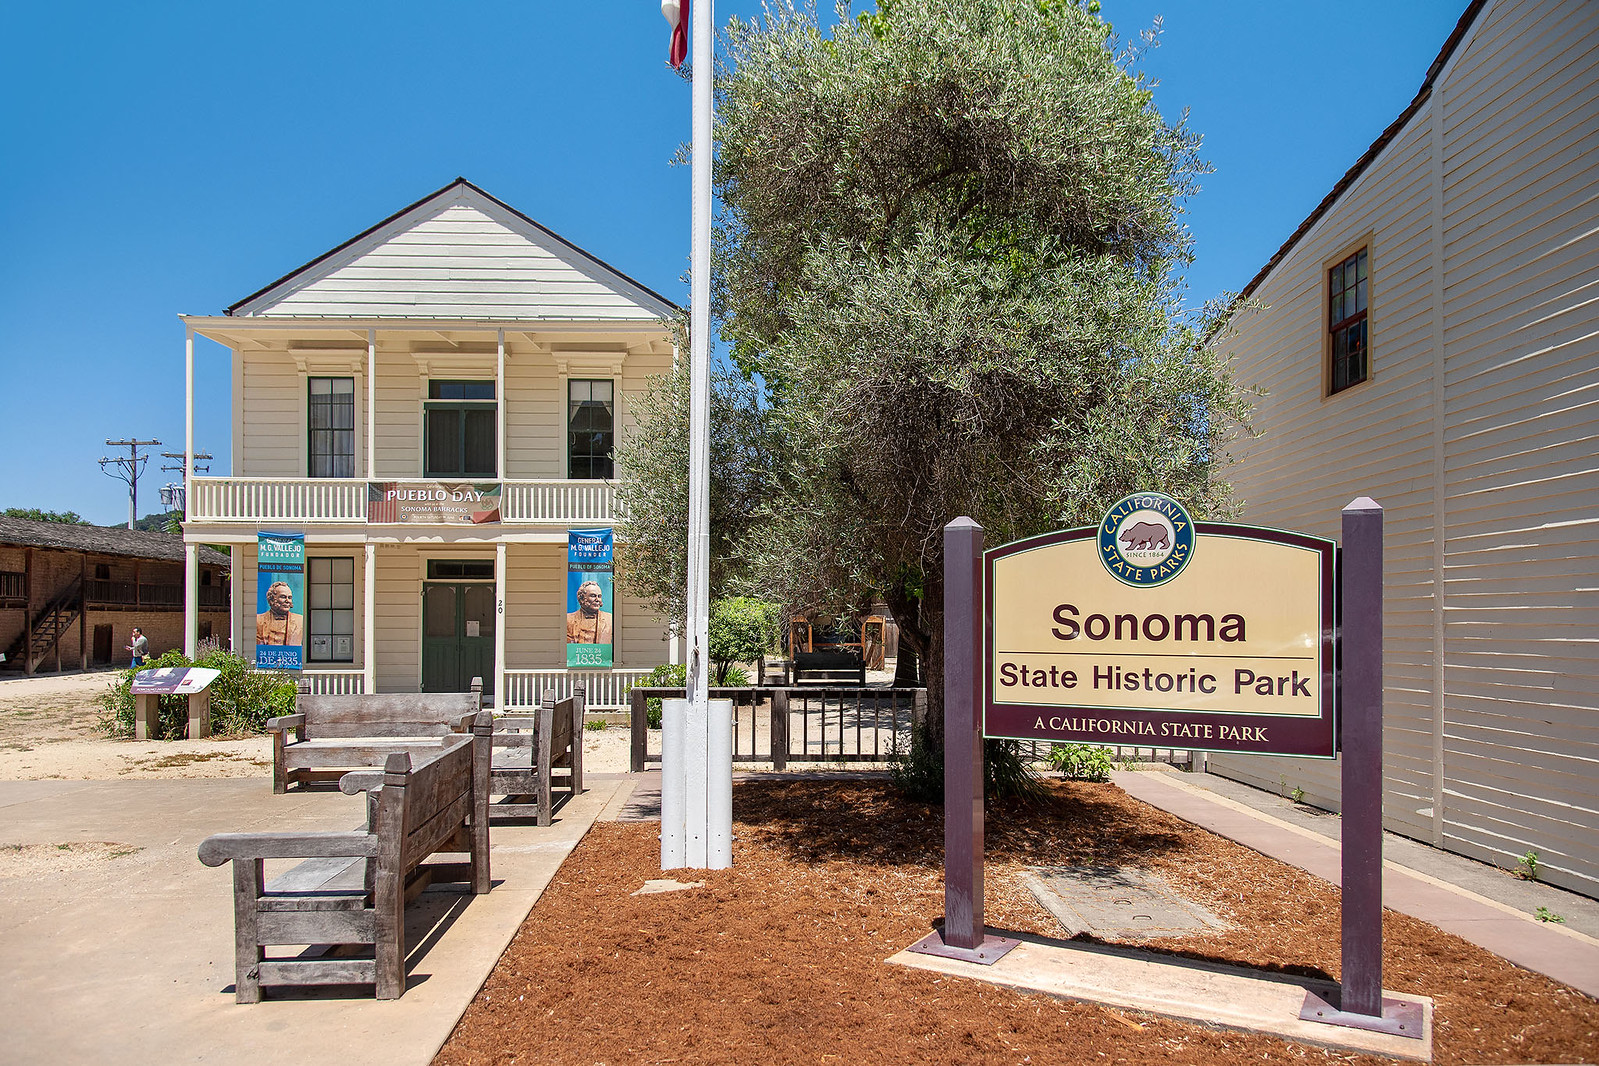 Cover Image for 503 Cherry Avenue, Sonoma presented by Daniel Casabonne